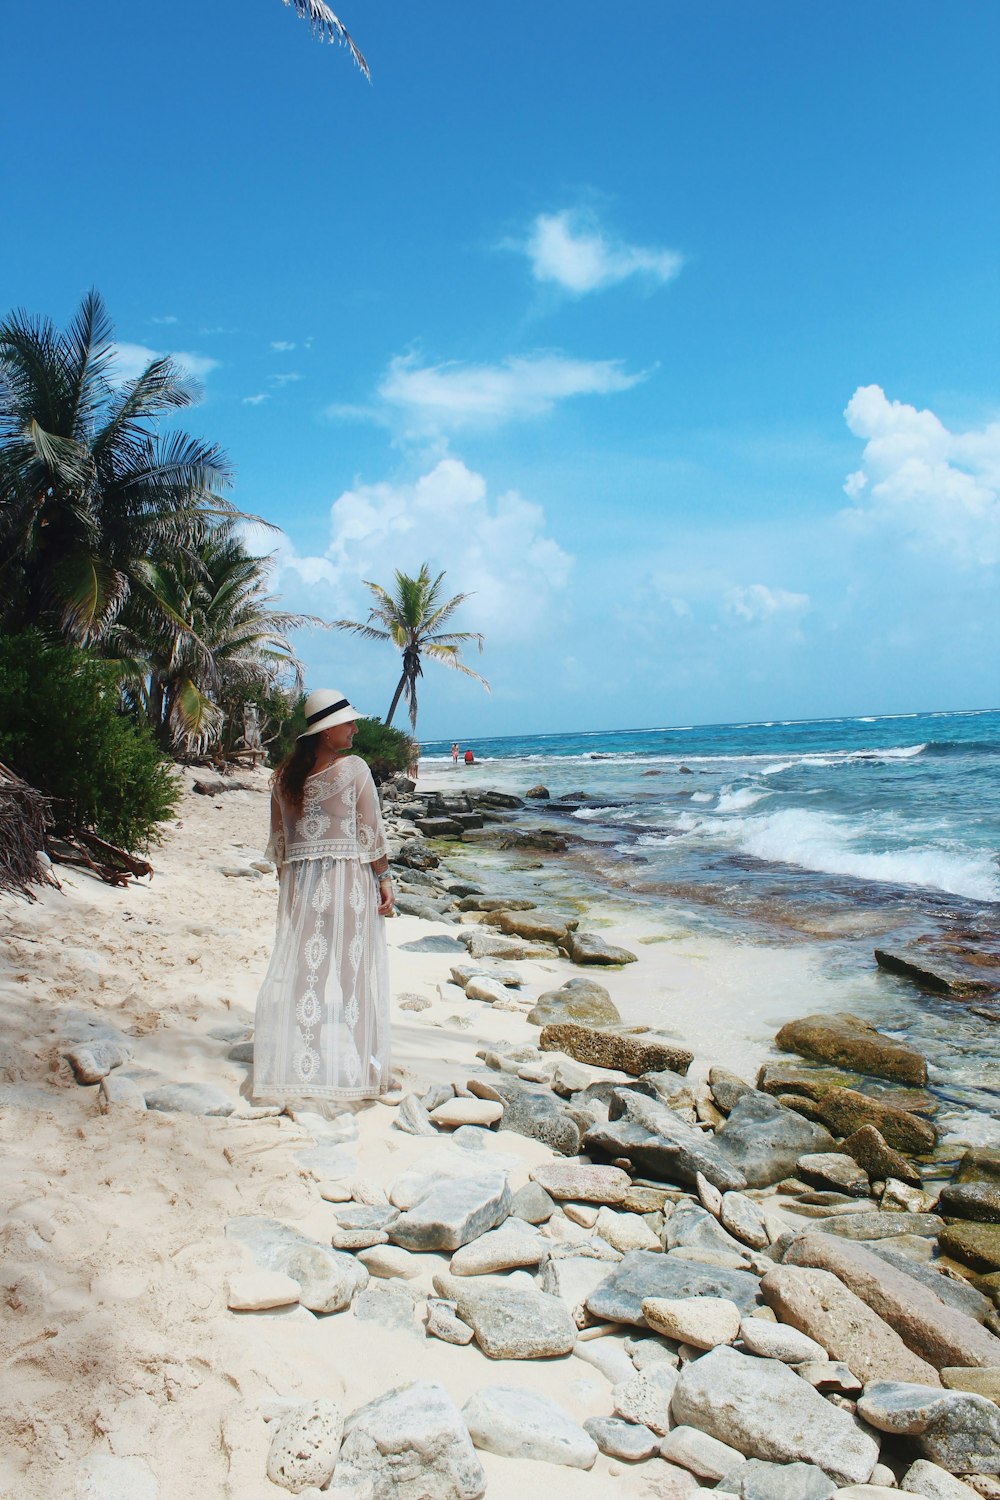 woman in white dress standing on beach shore during daytime